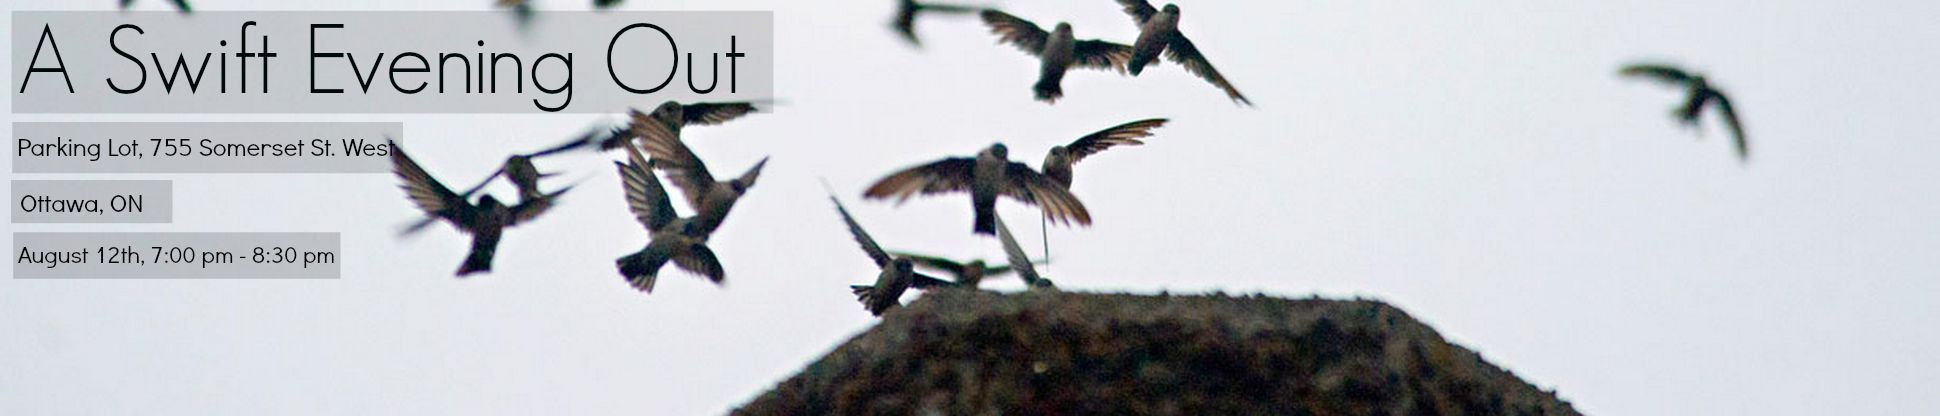 Chimney Swifts enter their roost